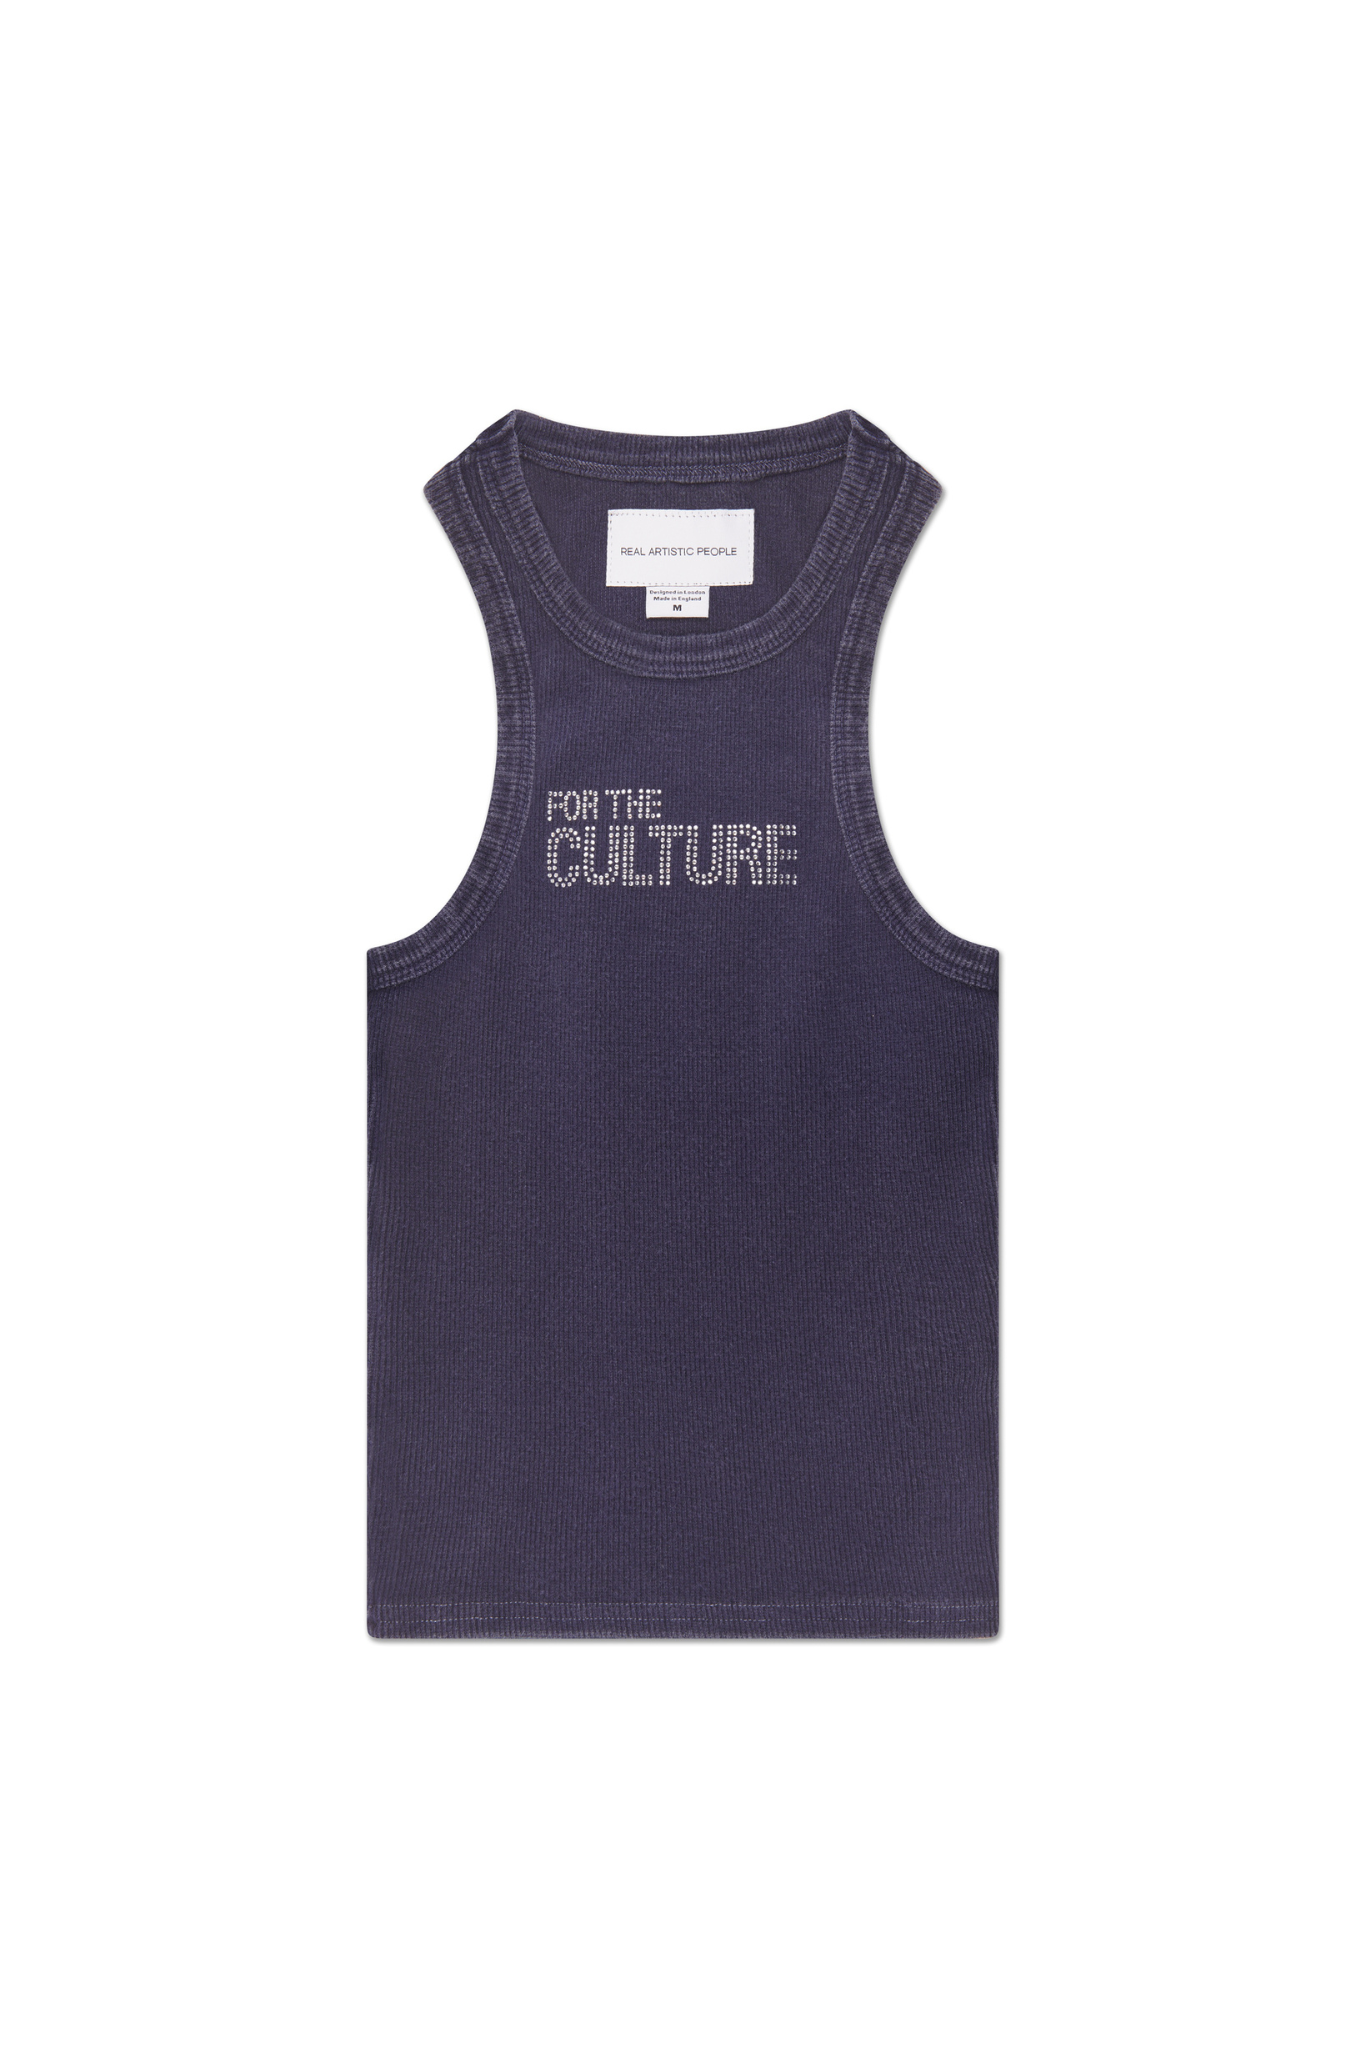 For The Culture Crystal Tank Top - Navy Blue